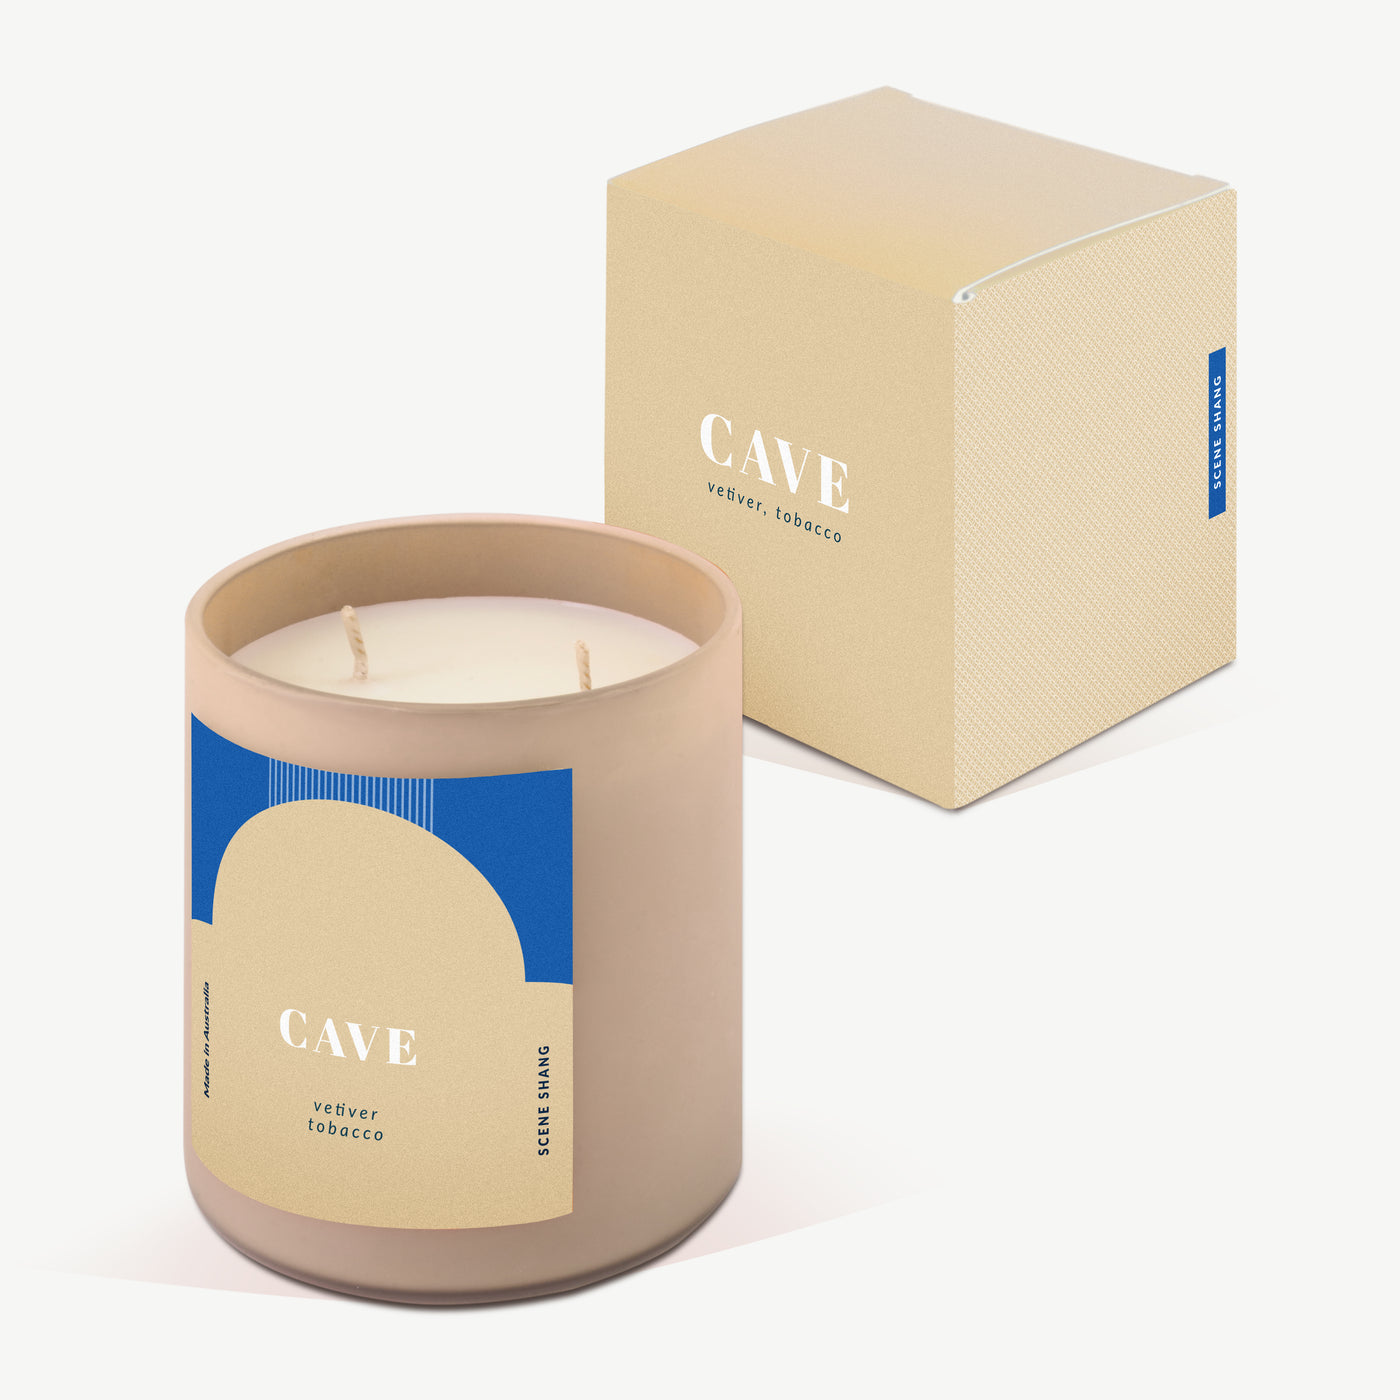 CAVE Triple Scented Soy Wax Candle (Vetiver, Tobacco)